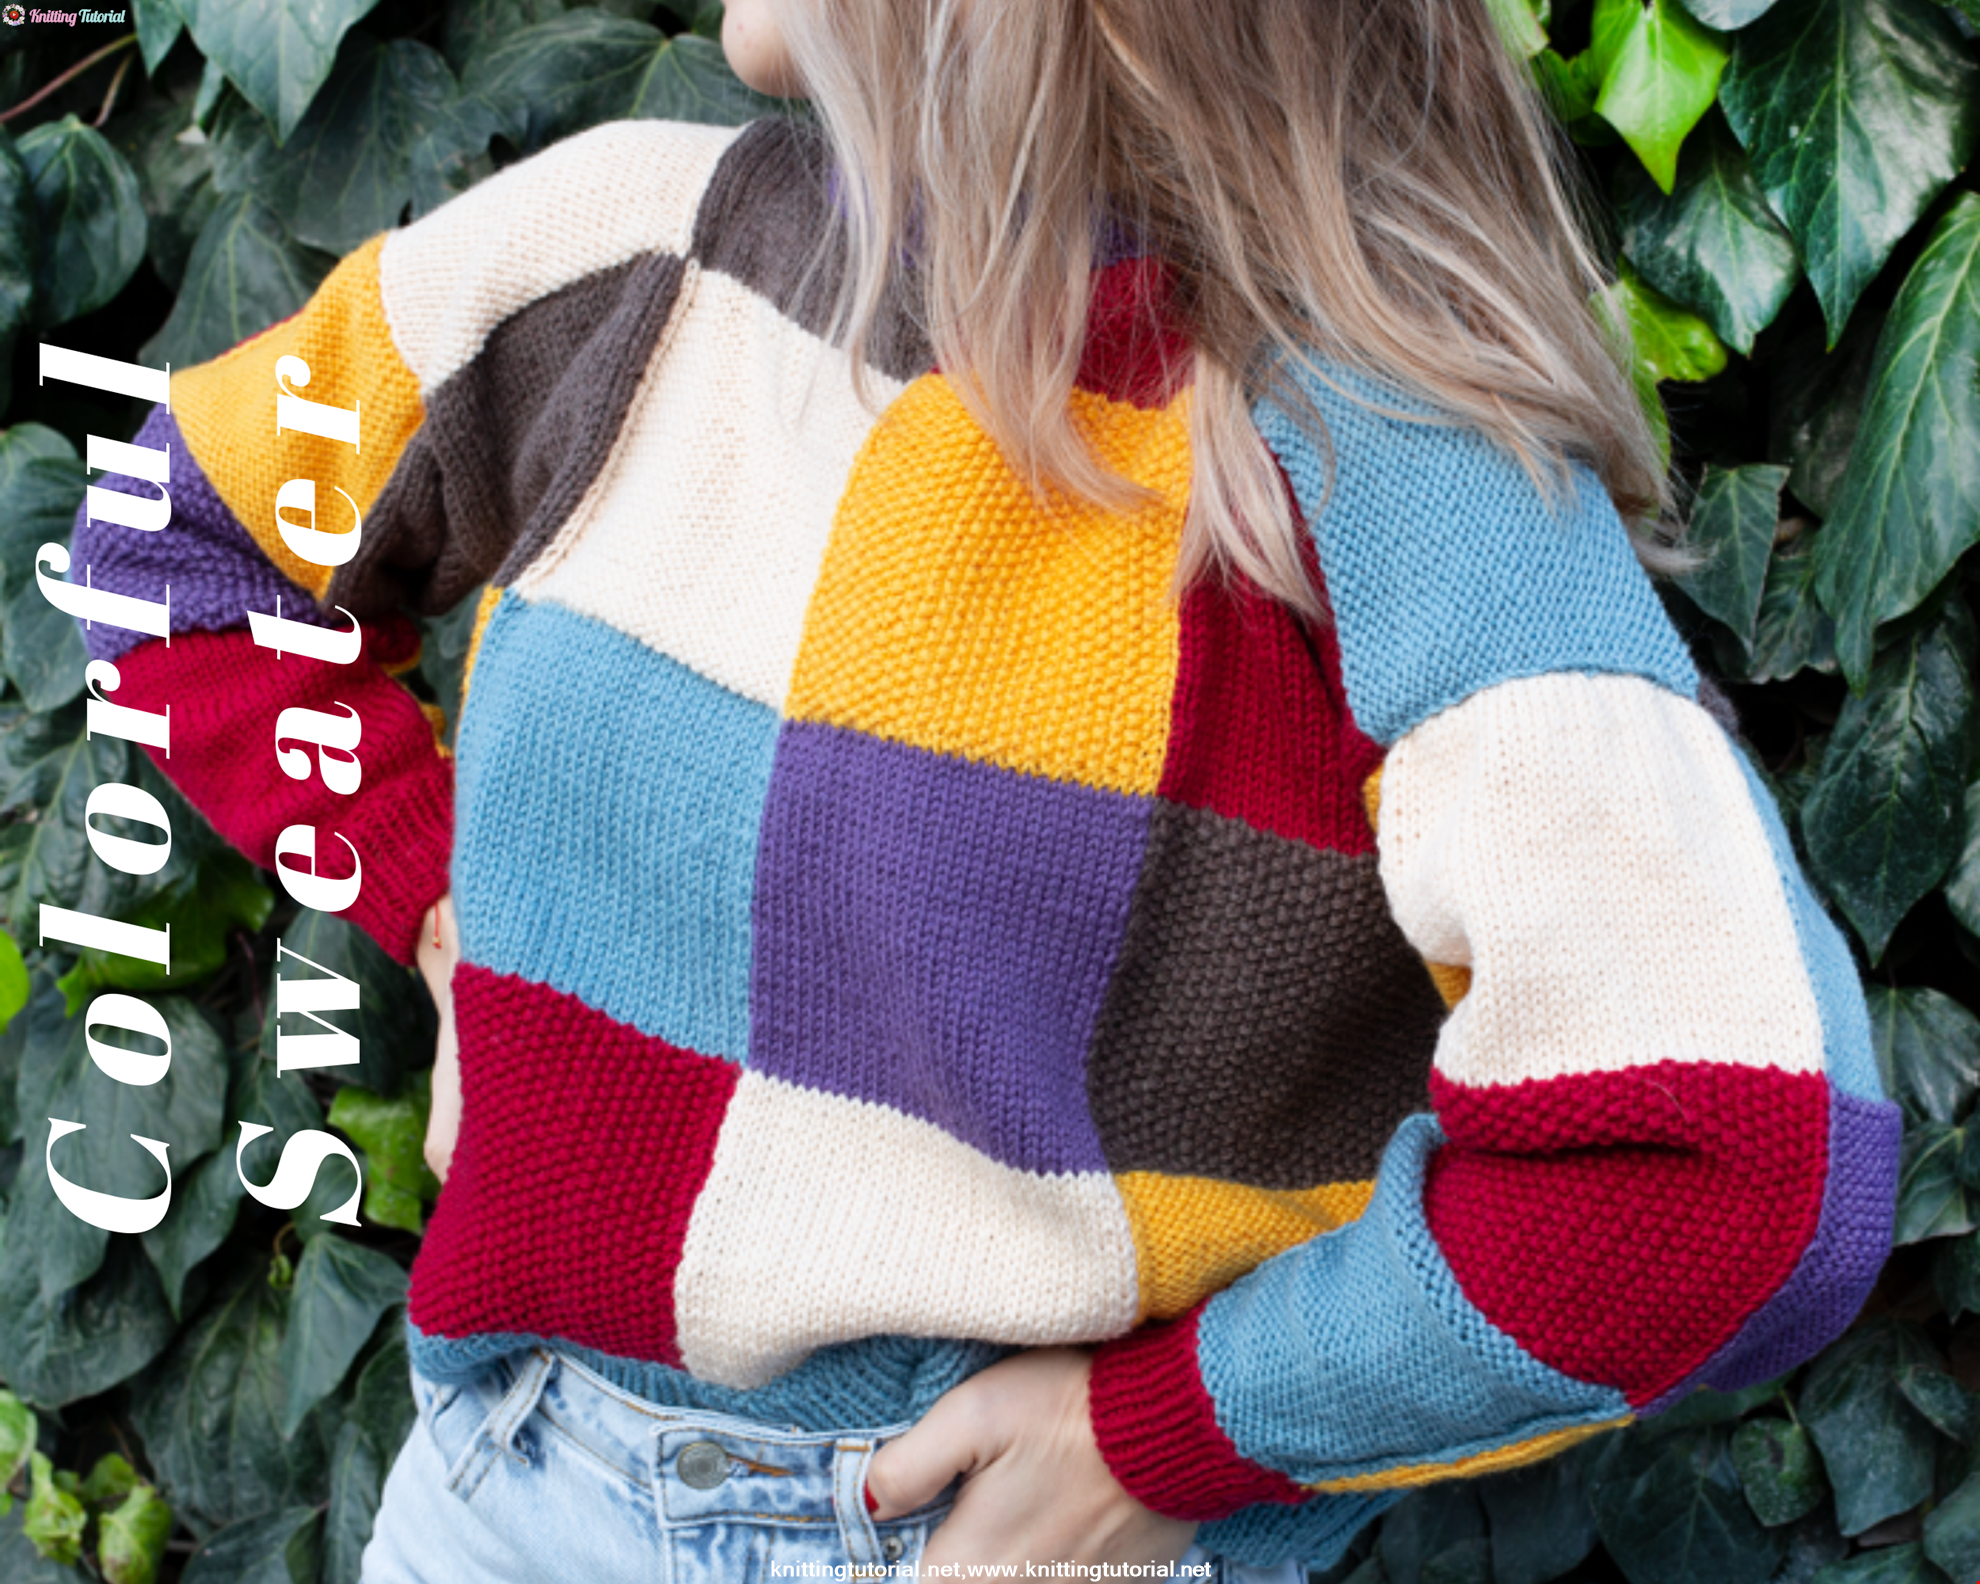 Making a Glamorous Colorful Sweater That Everyone Will Love